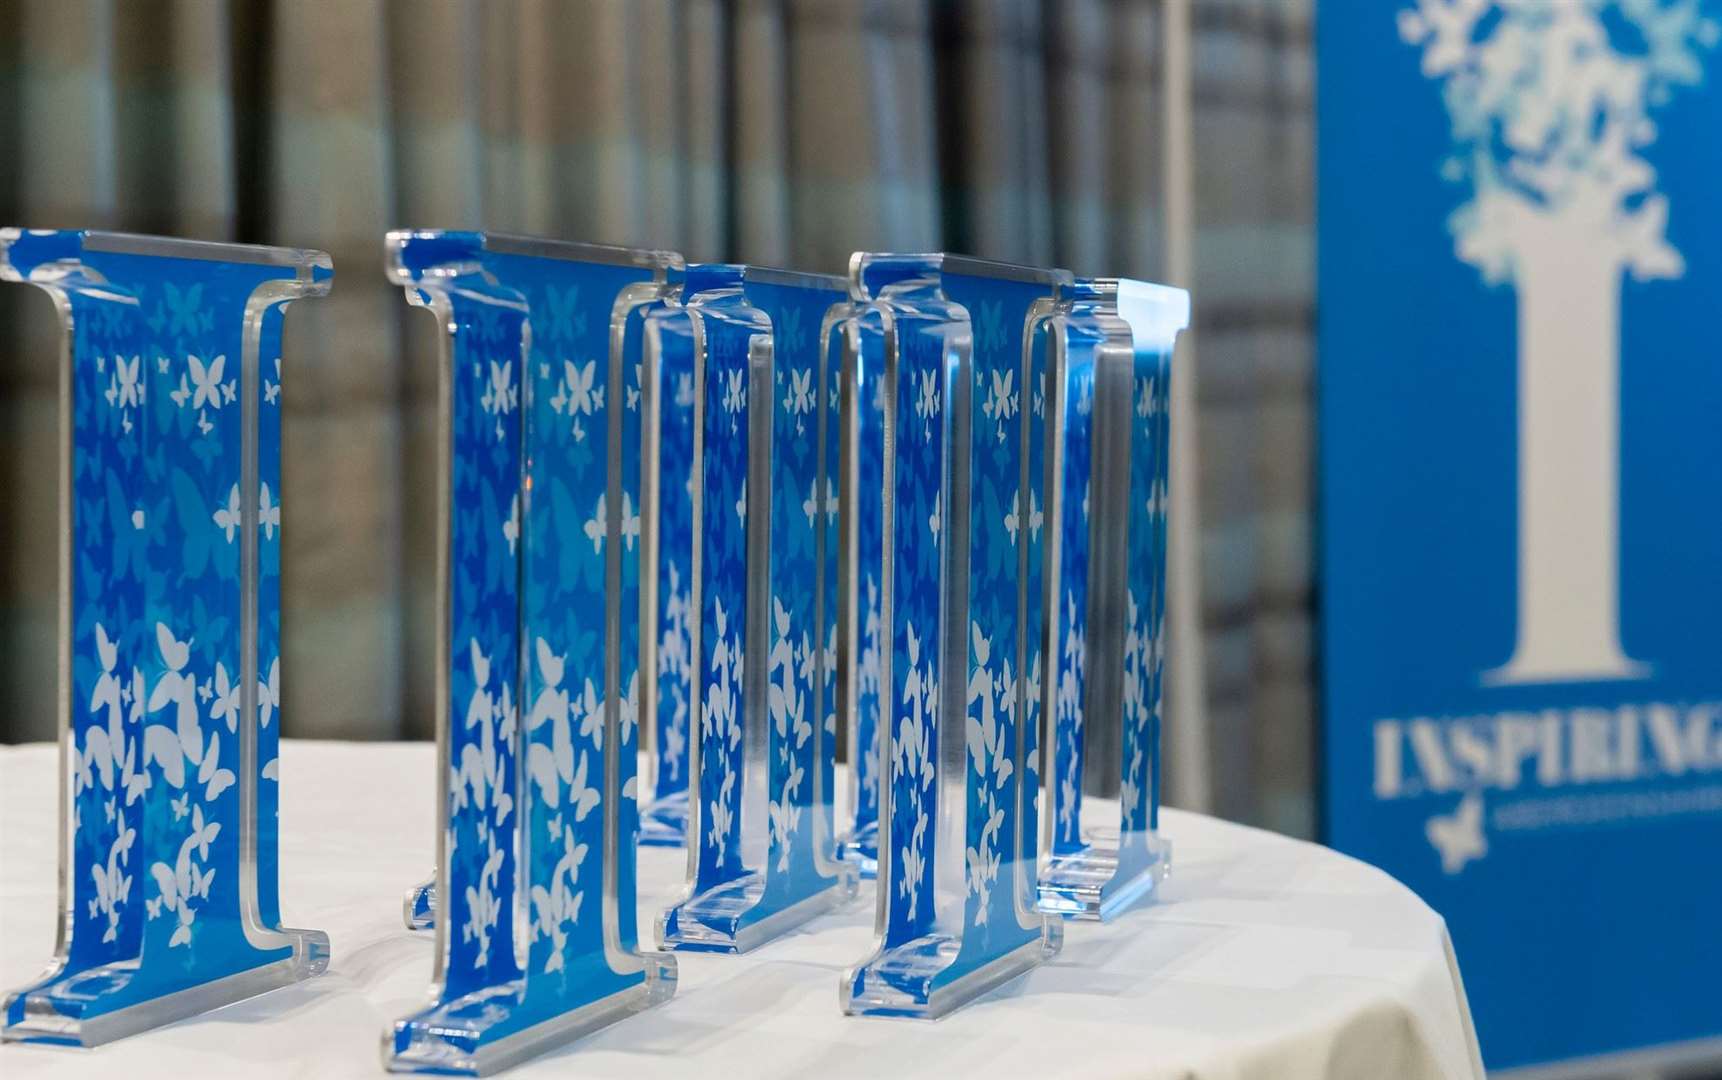 The awards finalists will see category winners presented with their trophies in September.